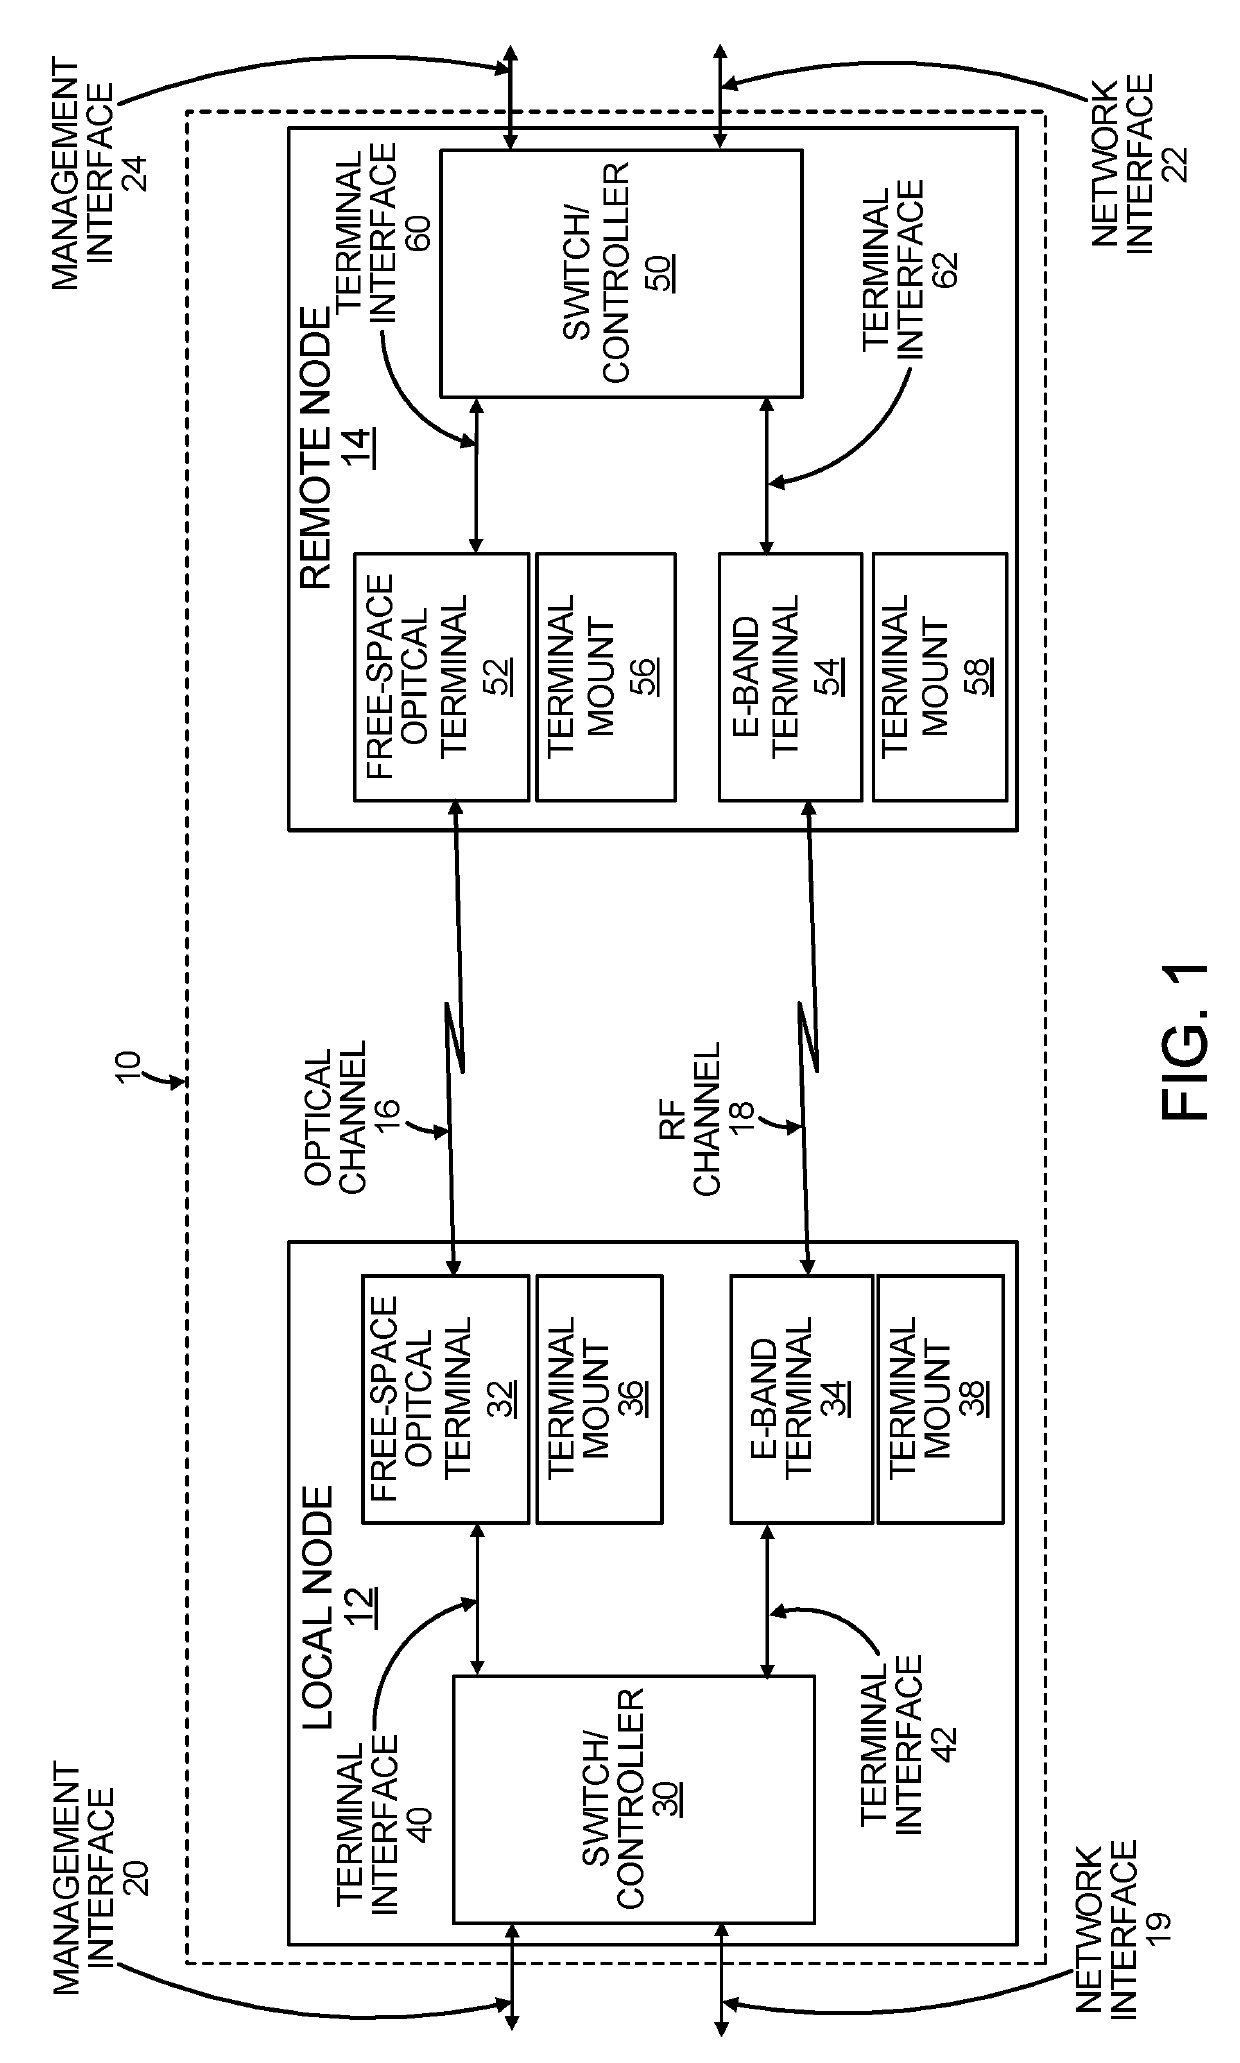 Hybrid wireless link employing free-space optical communication, radio frequency communication, and intelligent frame and packet switching